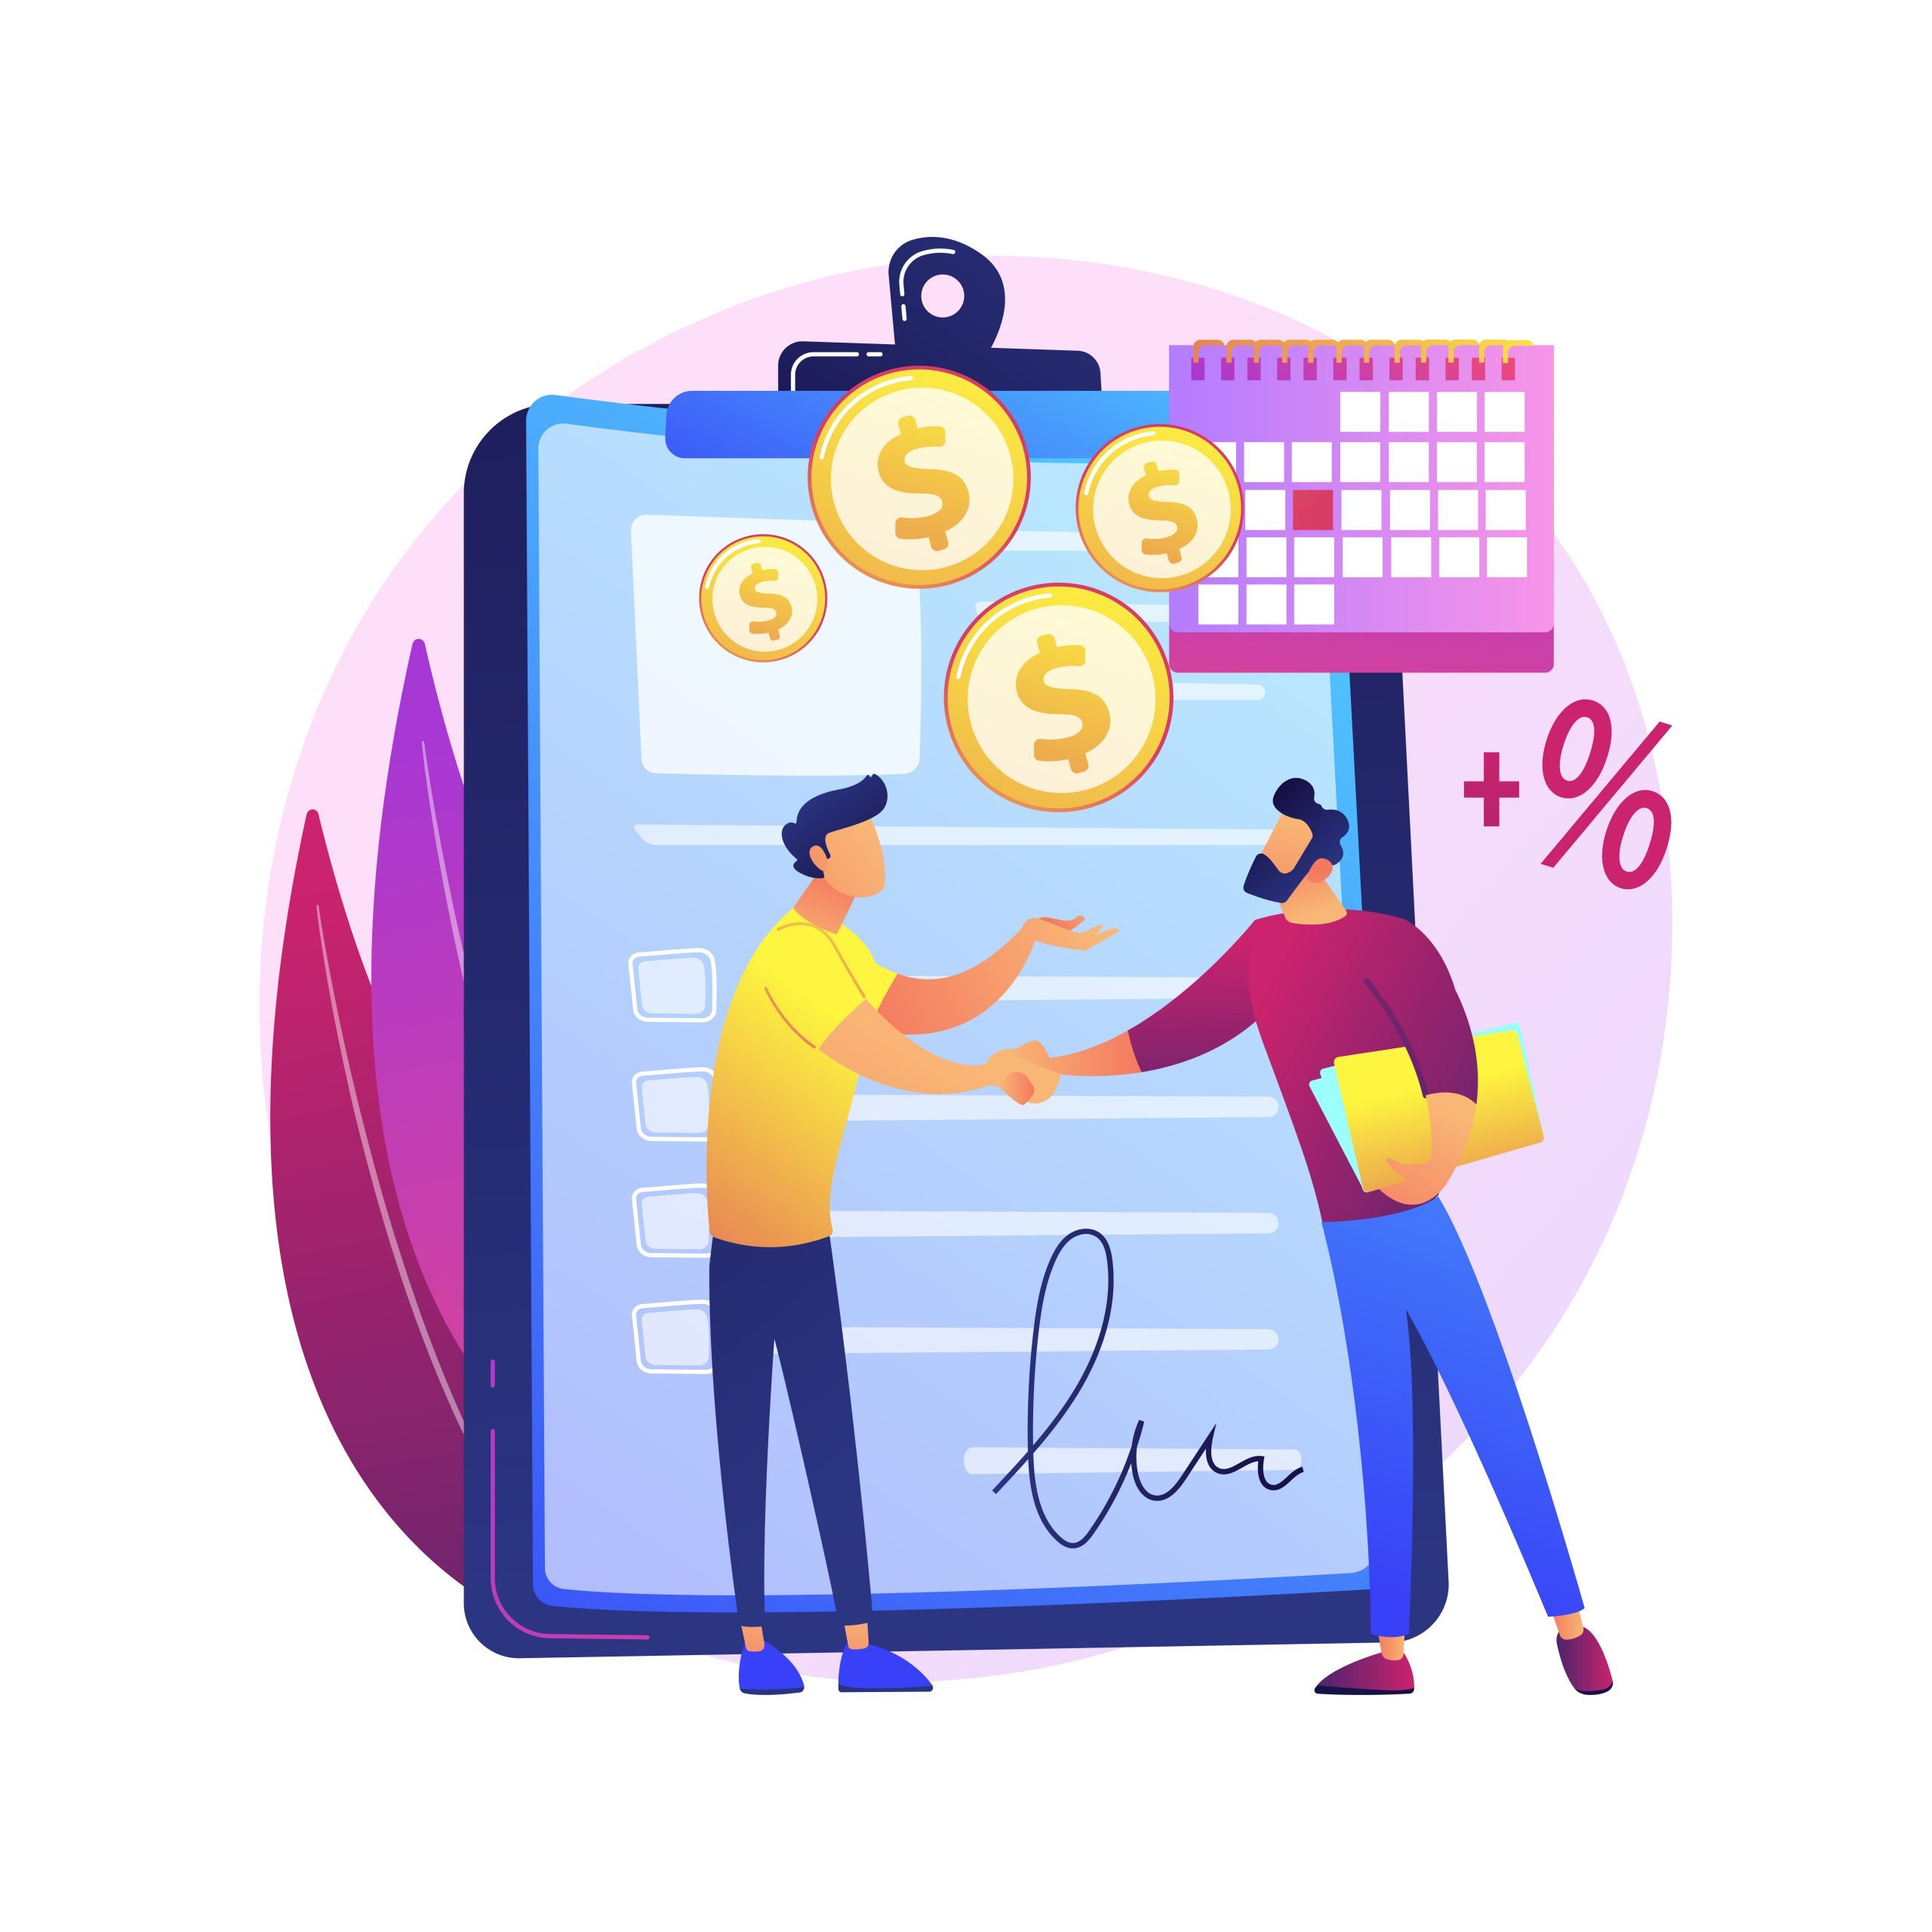 Financial obligation document. Promissory bill, loan agreement, debt return promise. Issuer and payee signing contract. Businessmen making deal. Vector isolated concept metaphor illustration